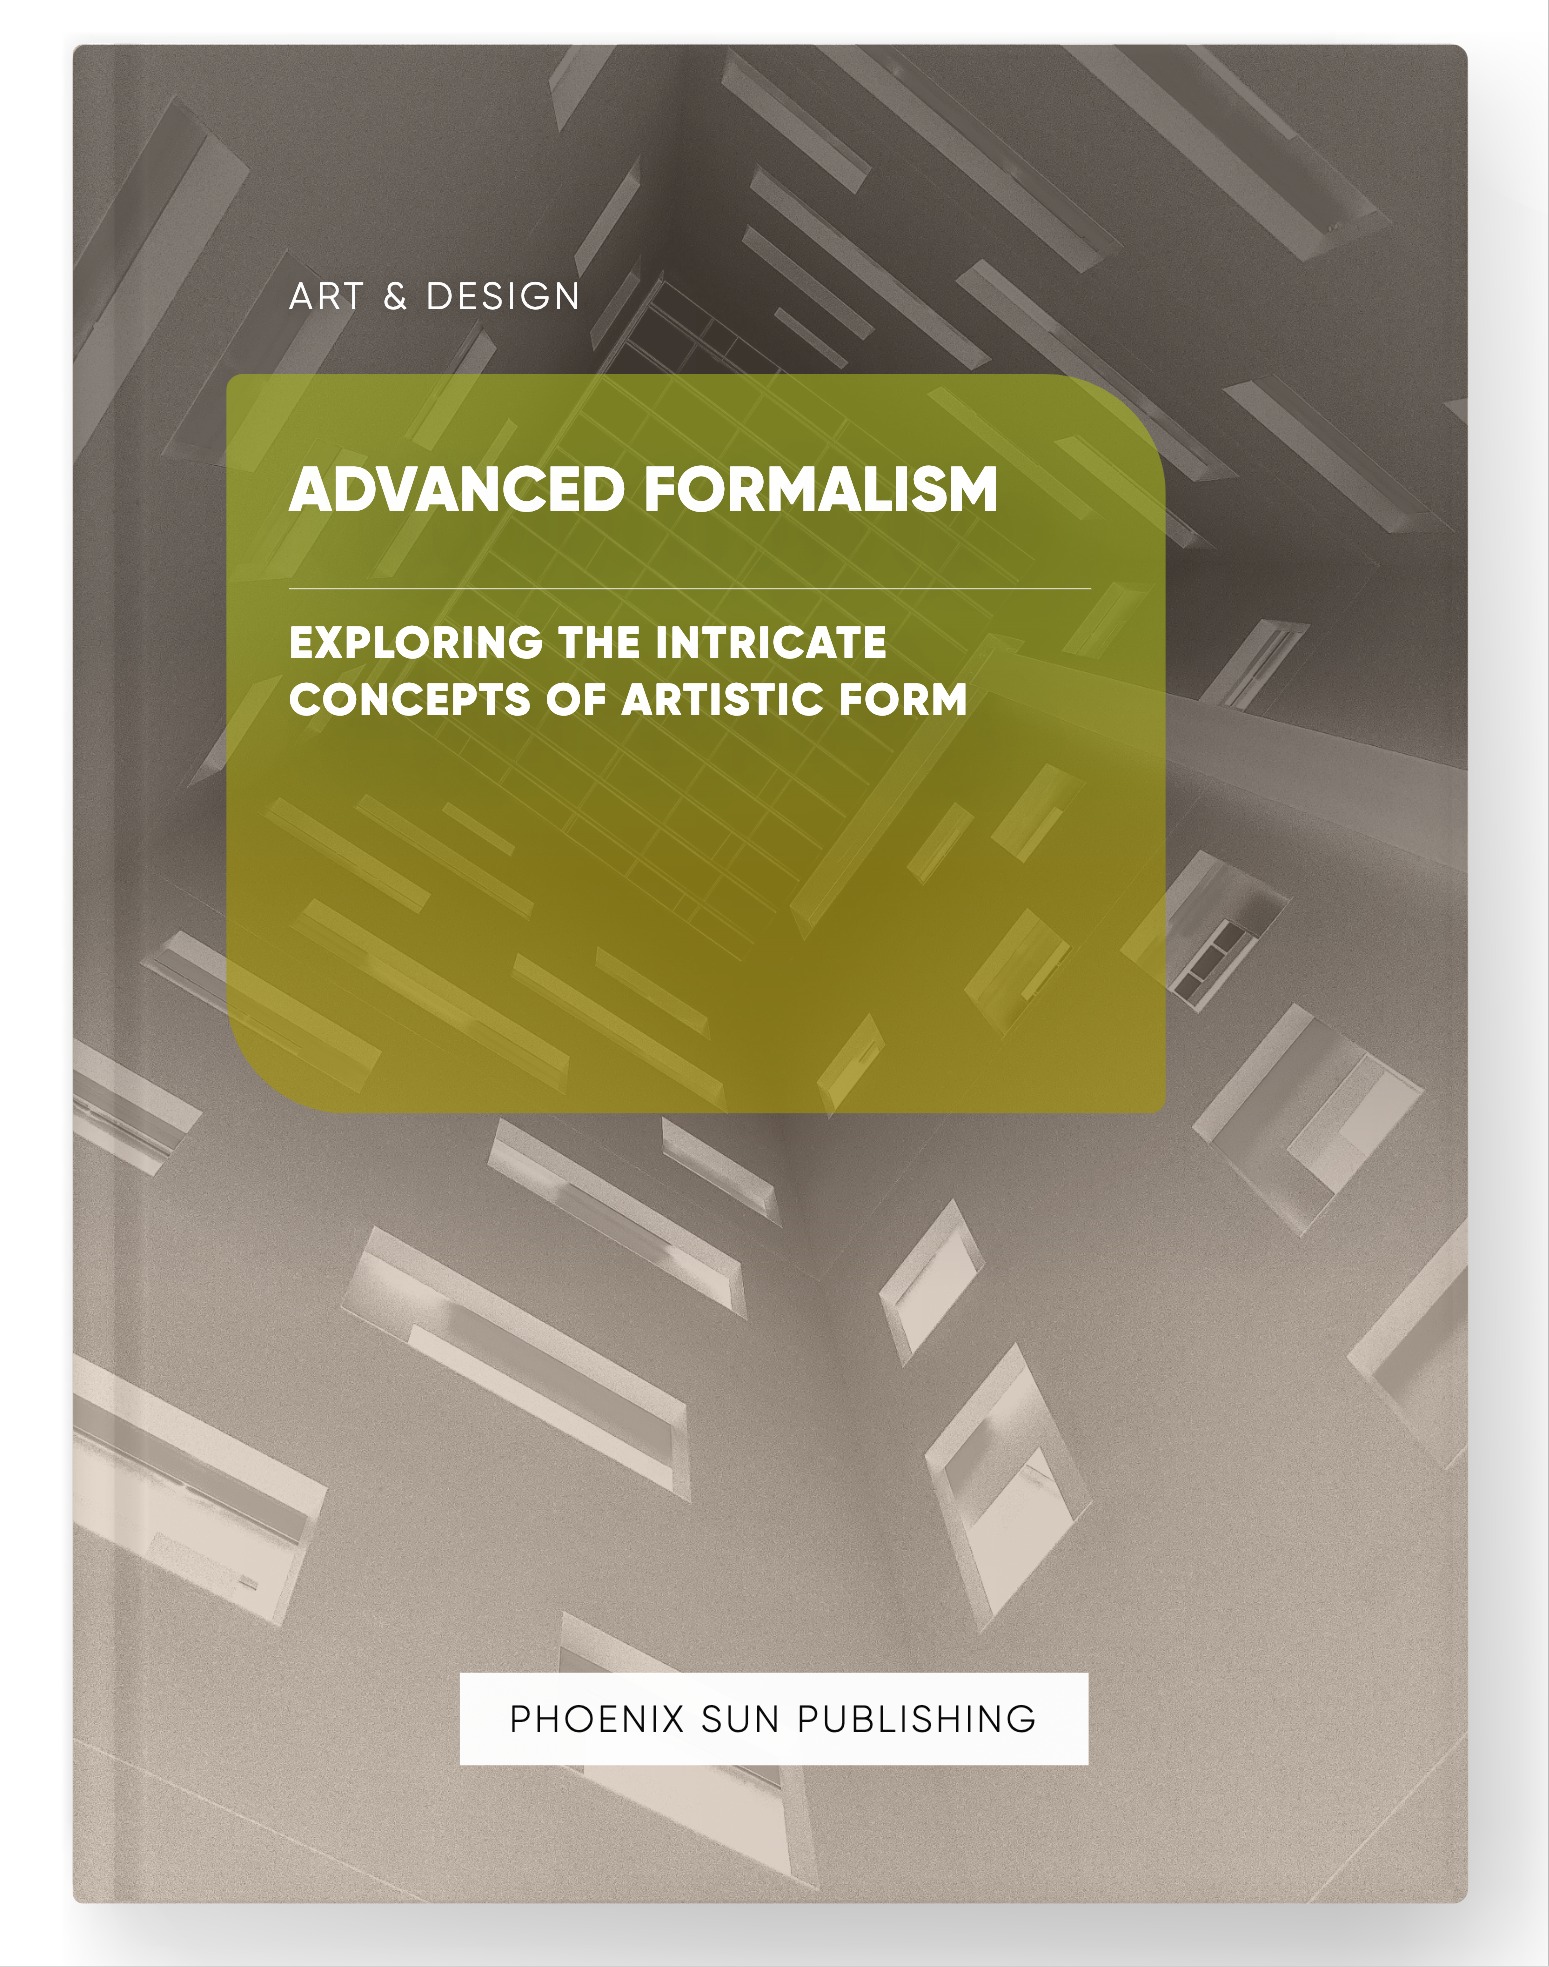 Advanced Formalism – Exploring the Intricate Concepts of Artistic Form